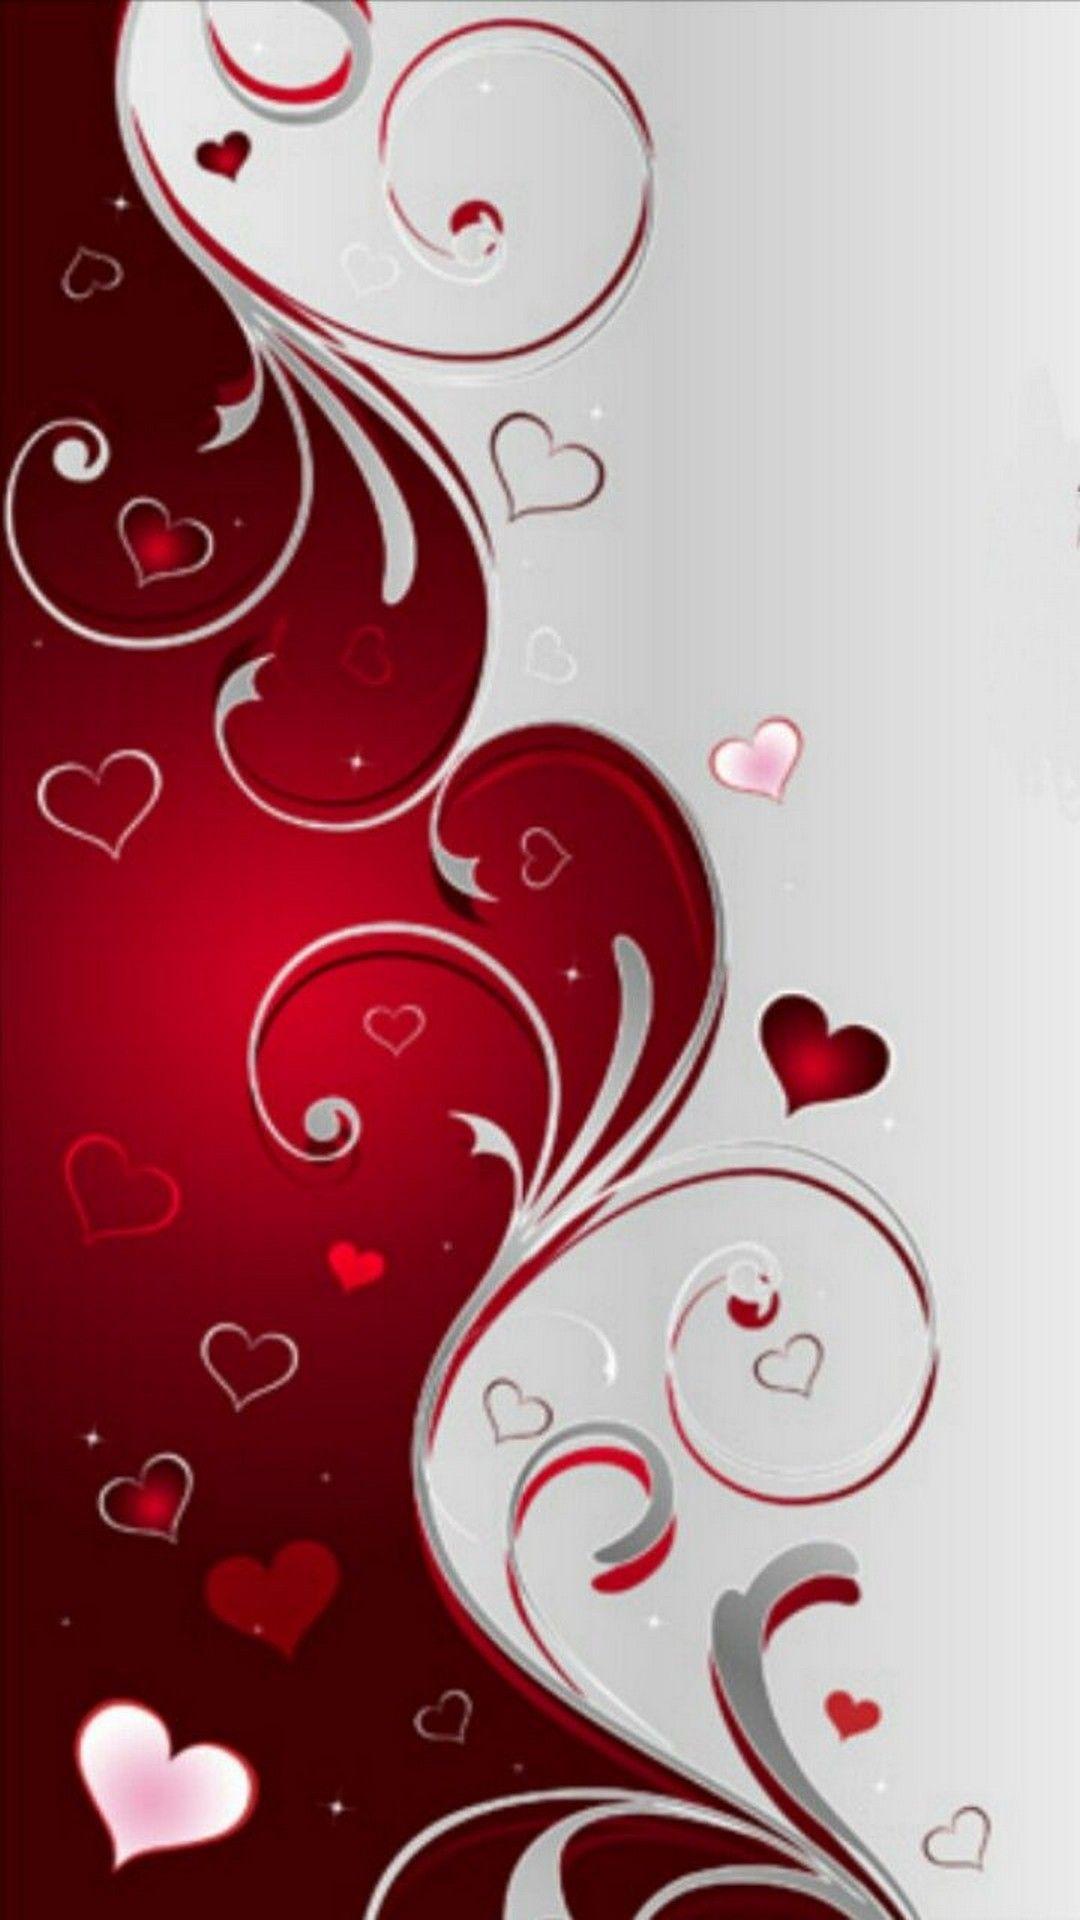 Happy Valentines Day Wallpaper 4K February 14th 8391